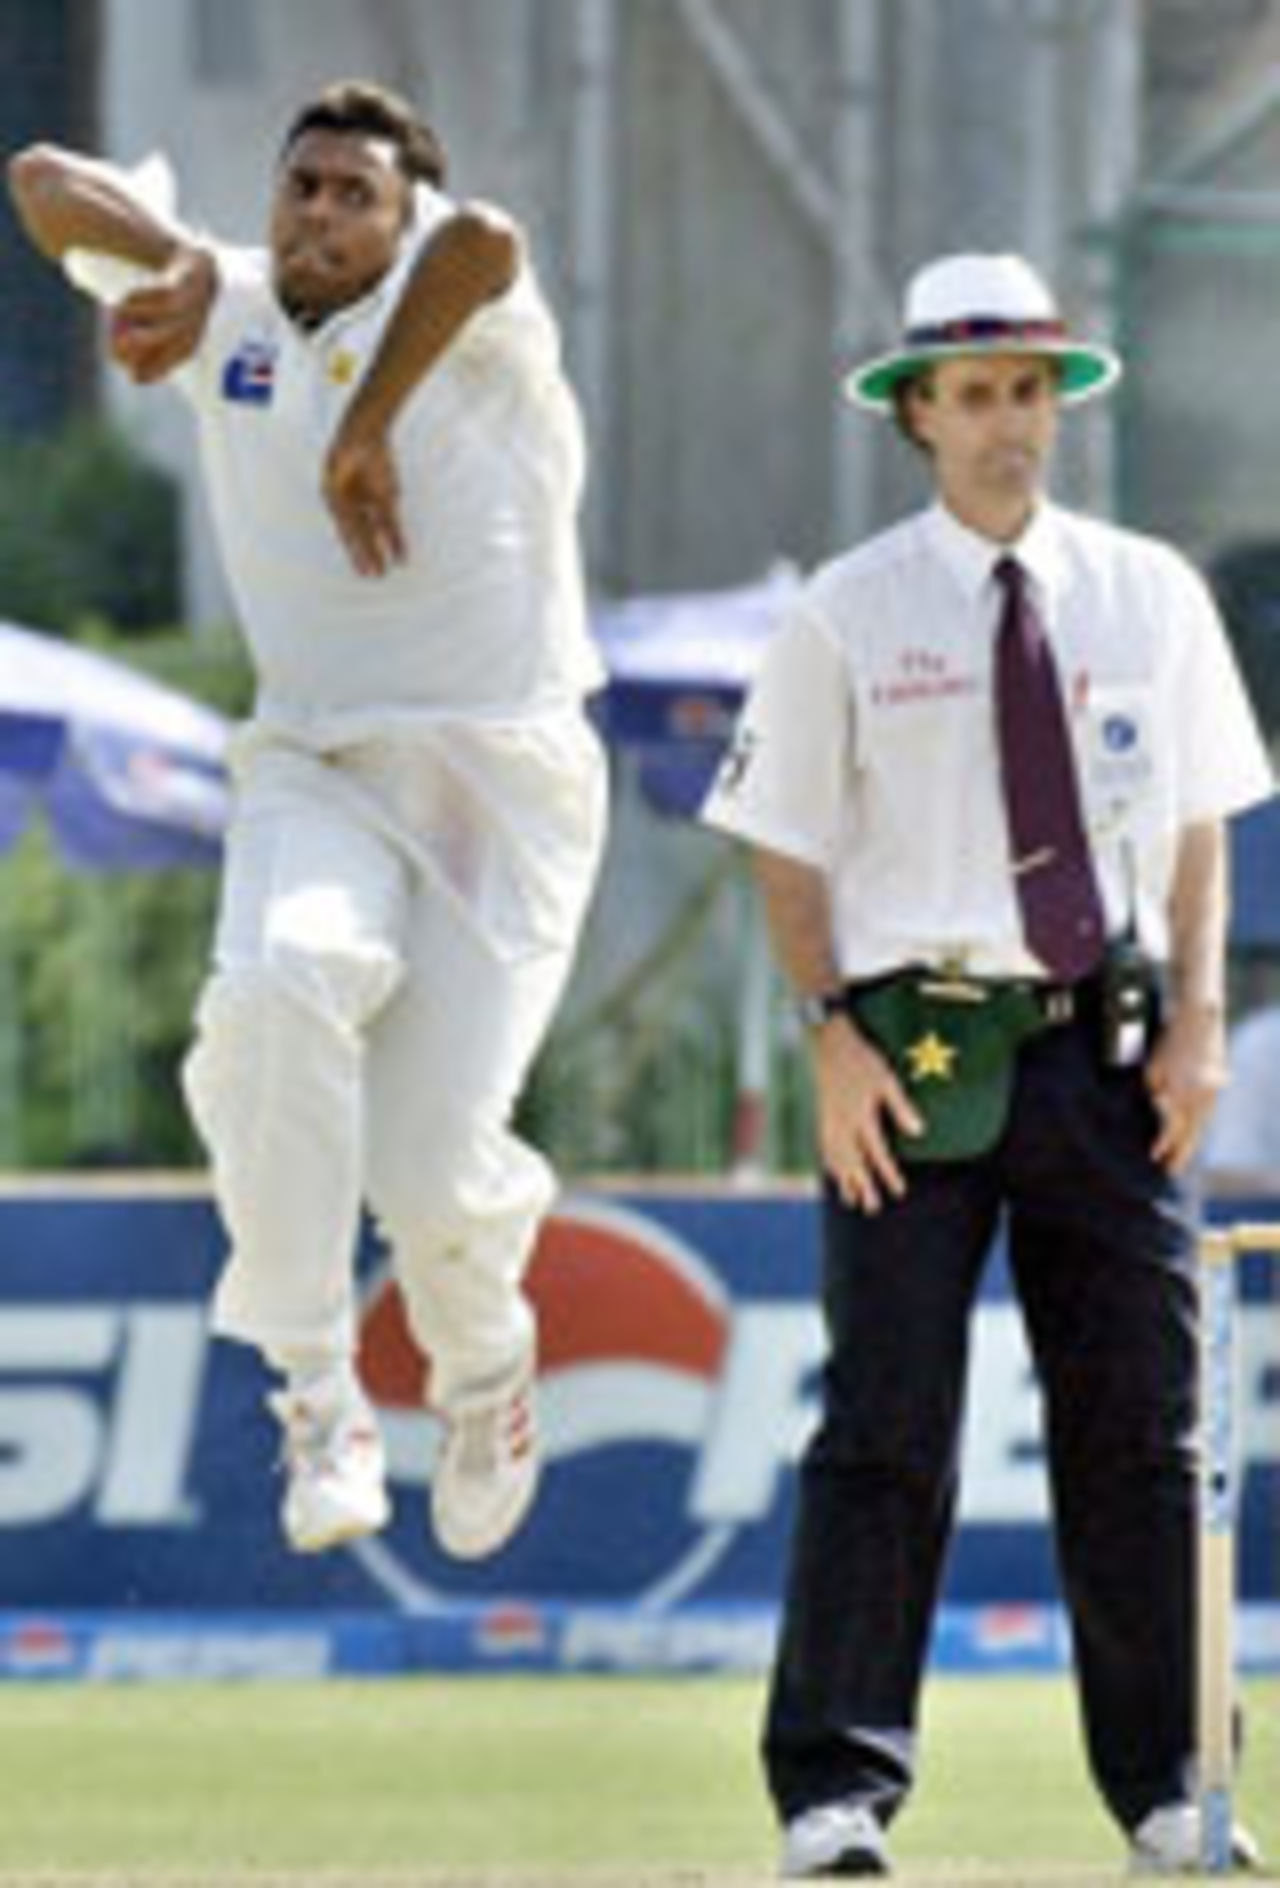 Danish Kaneria bowling from the pavilion end on the fourth day of the second Test against Sri Lanka at Karachi, Oct 31 2004